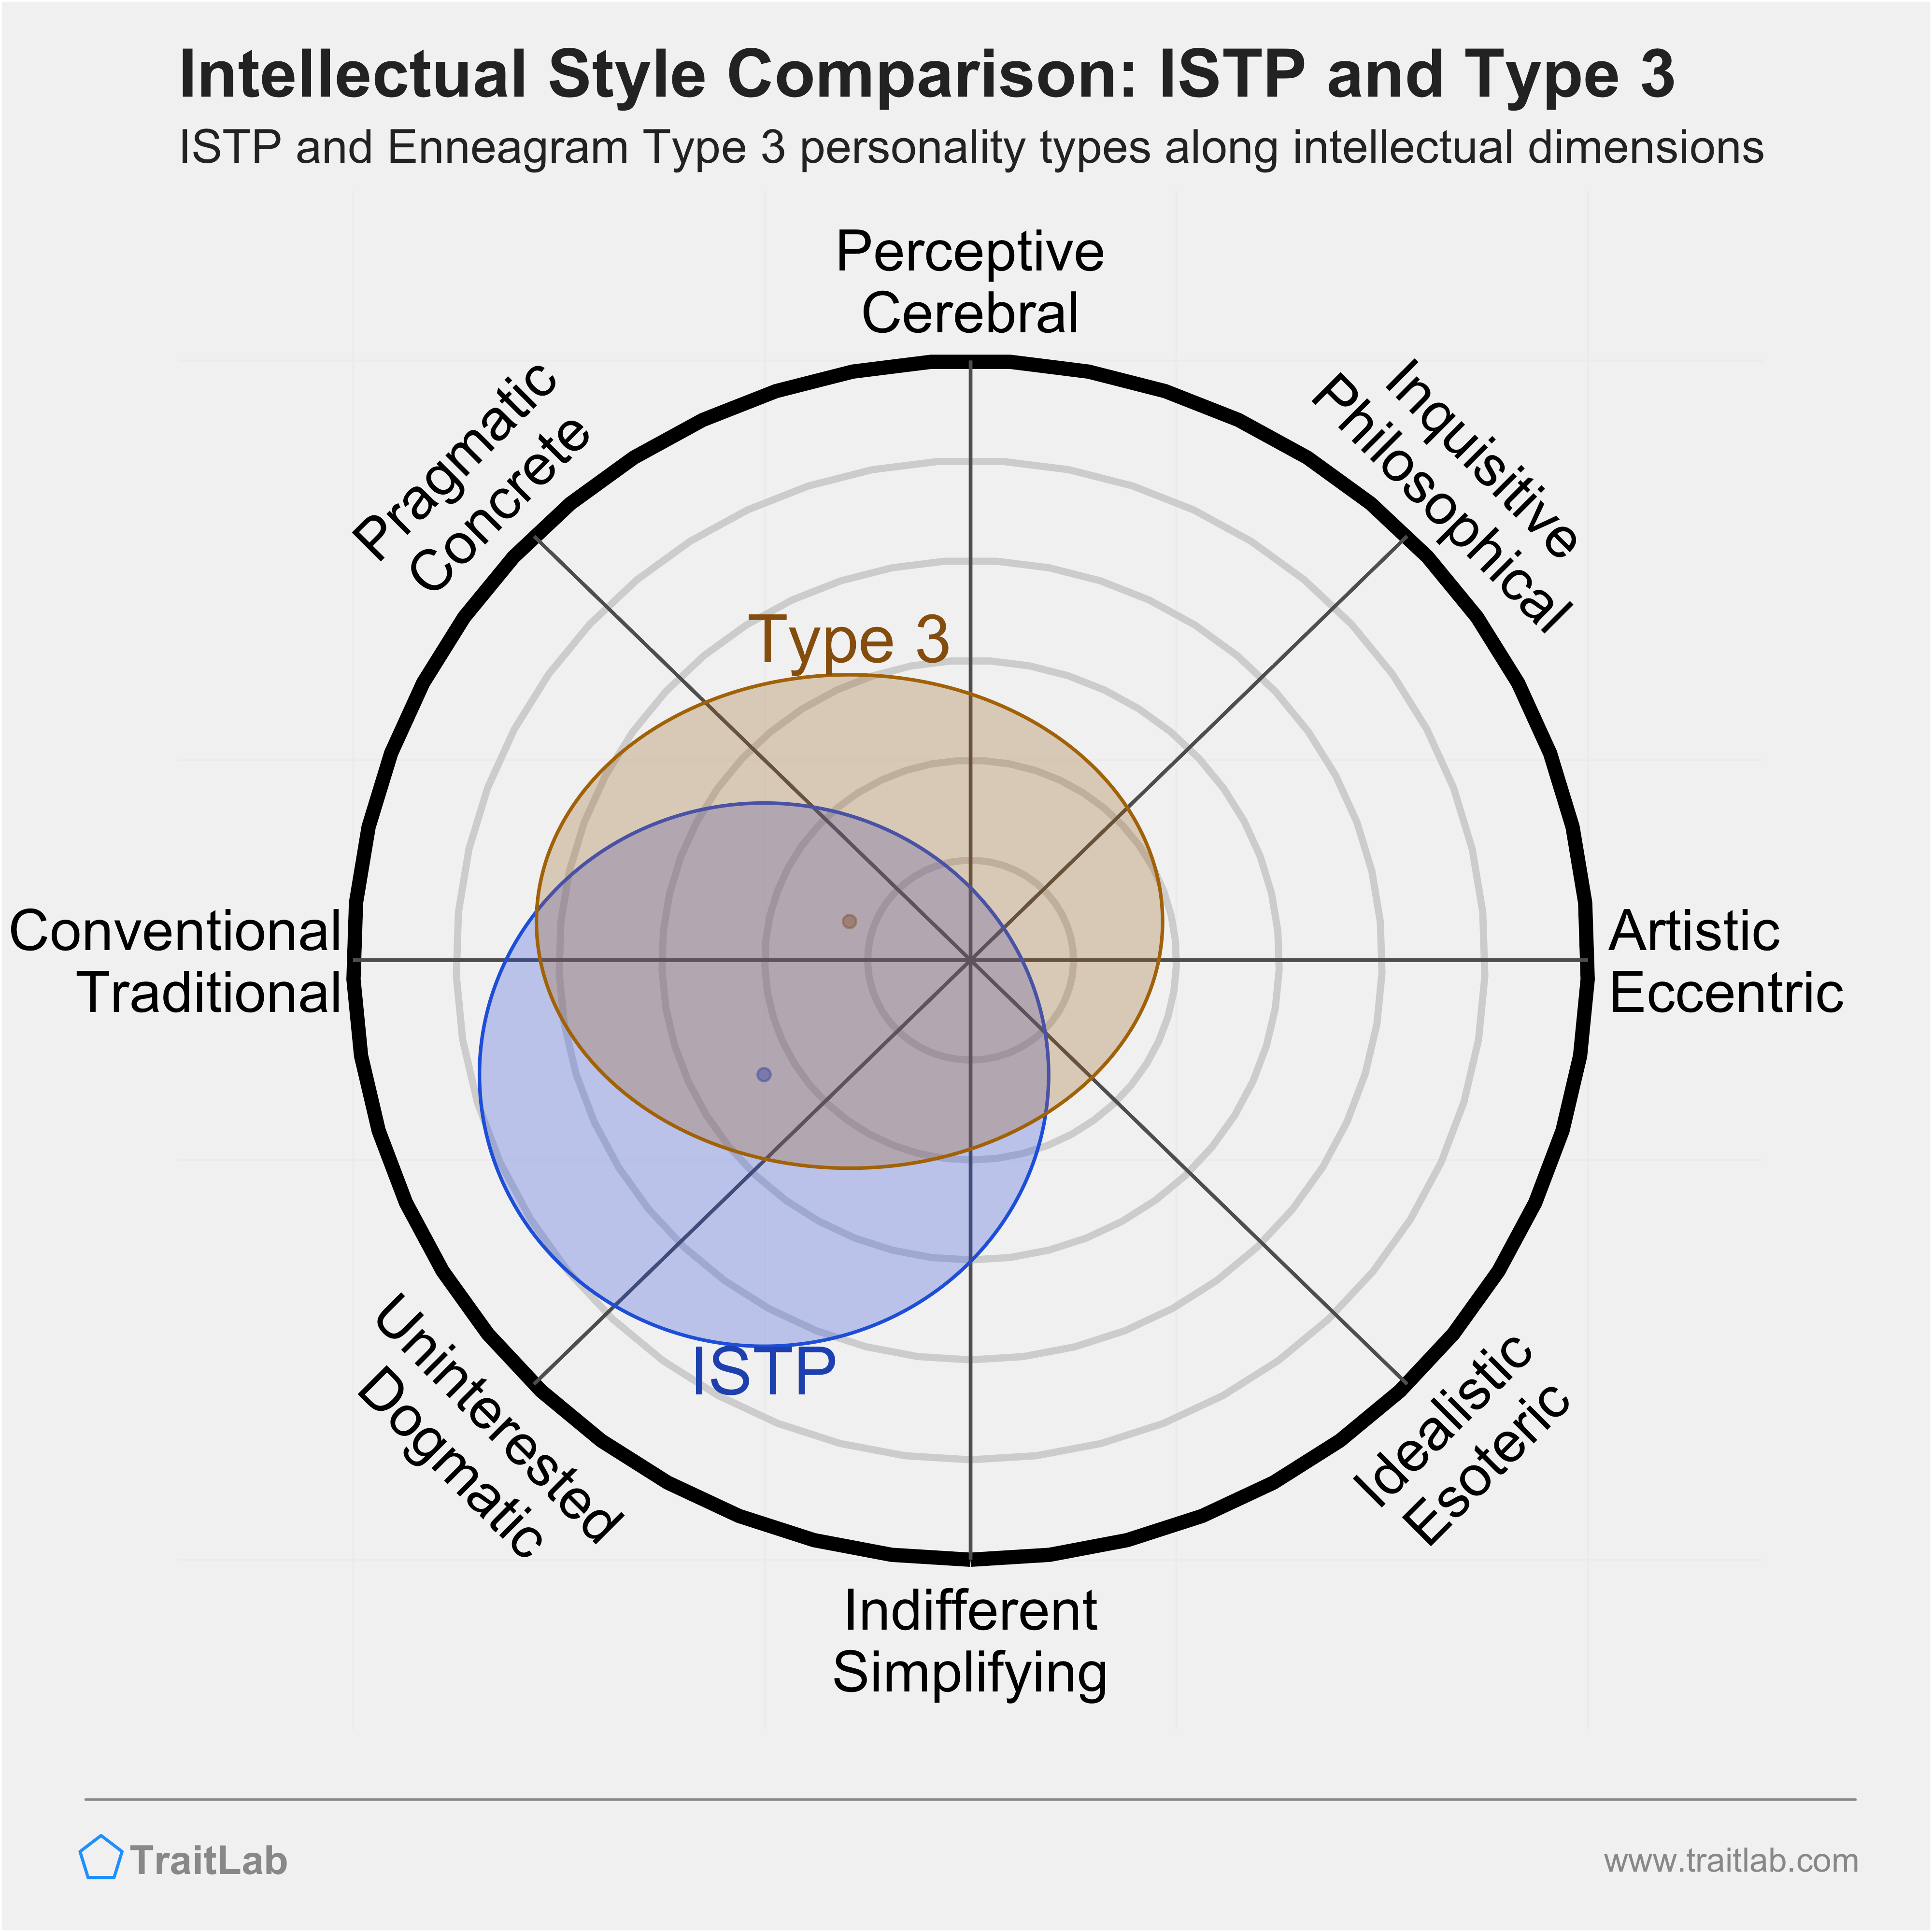 ISTP and Type 3 comparison across intellectual dimensions